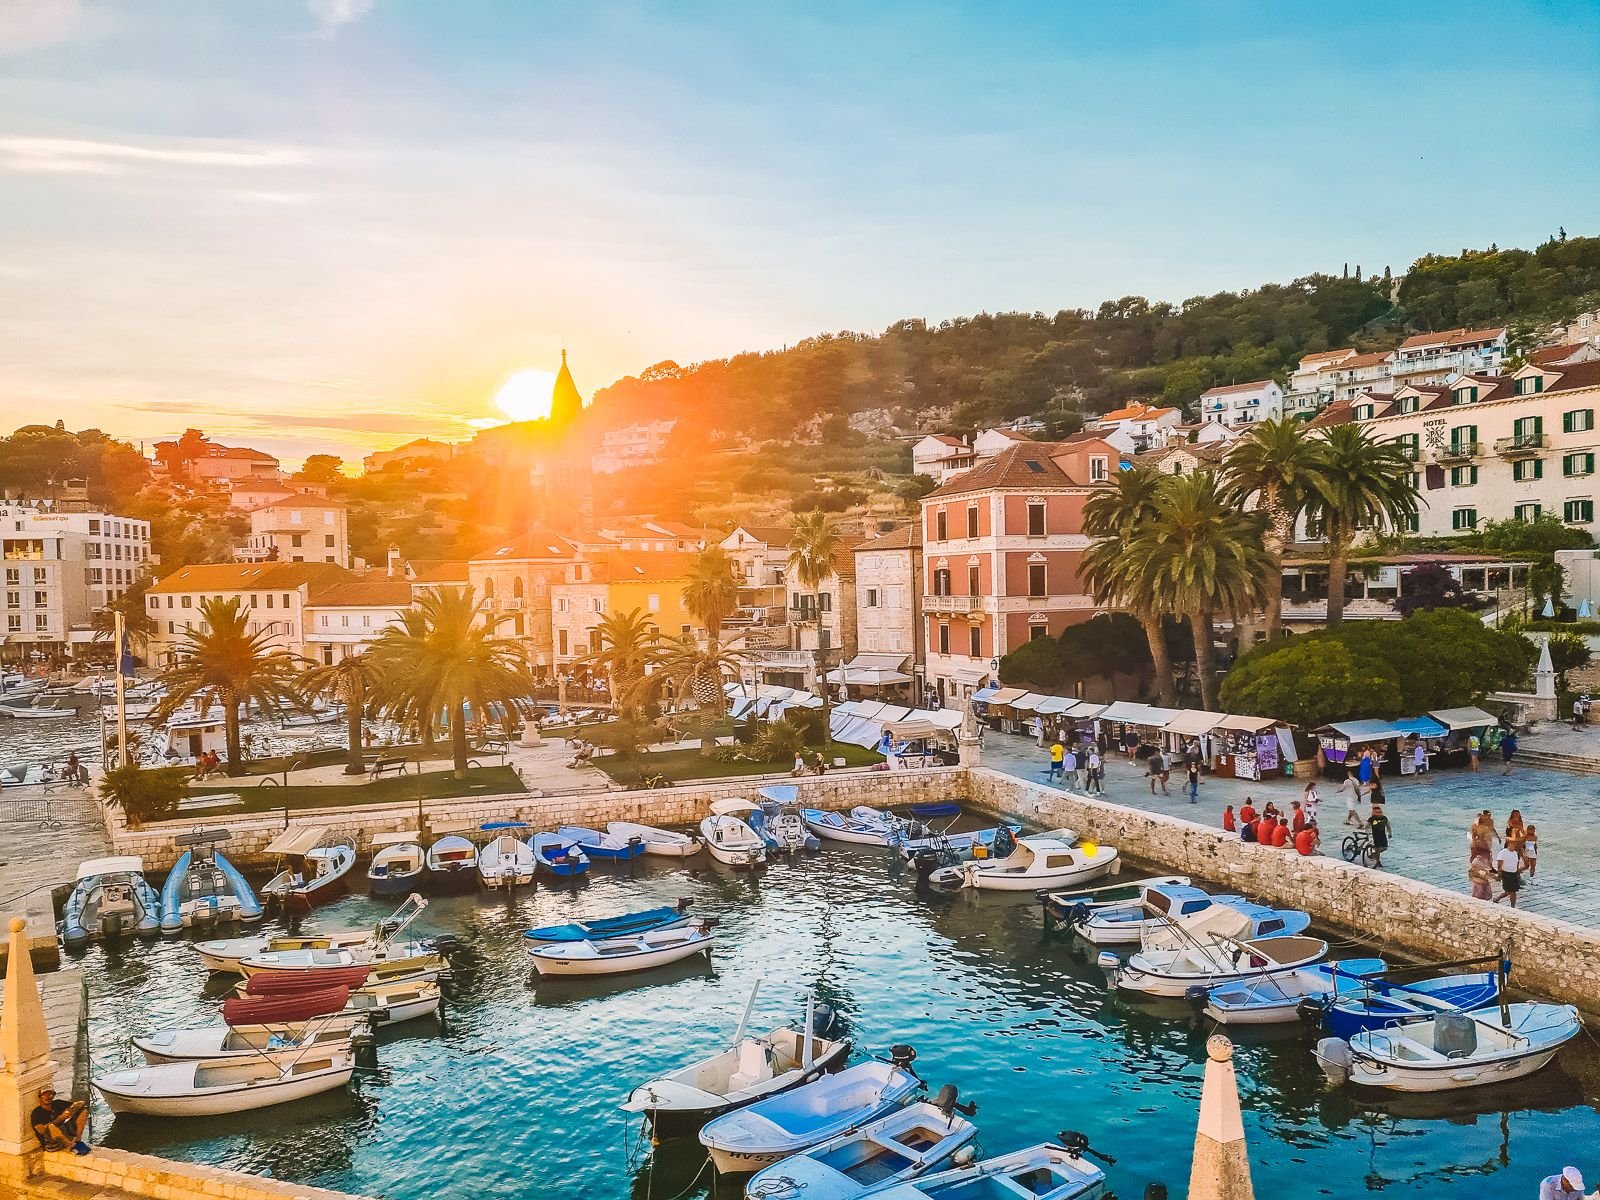 A view from above Hvar old town, with small boats docks in the harbout and colourful stone buildings up the hill which the sun is setting behind